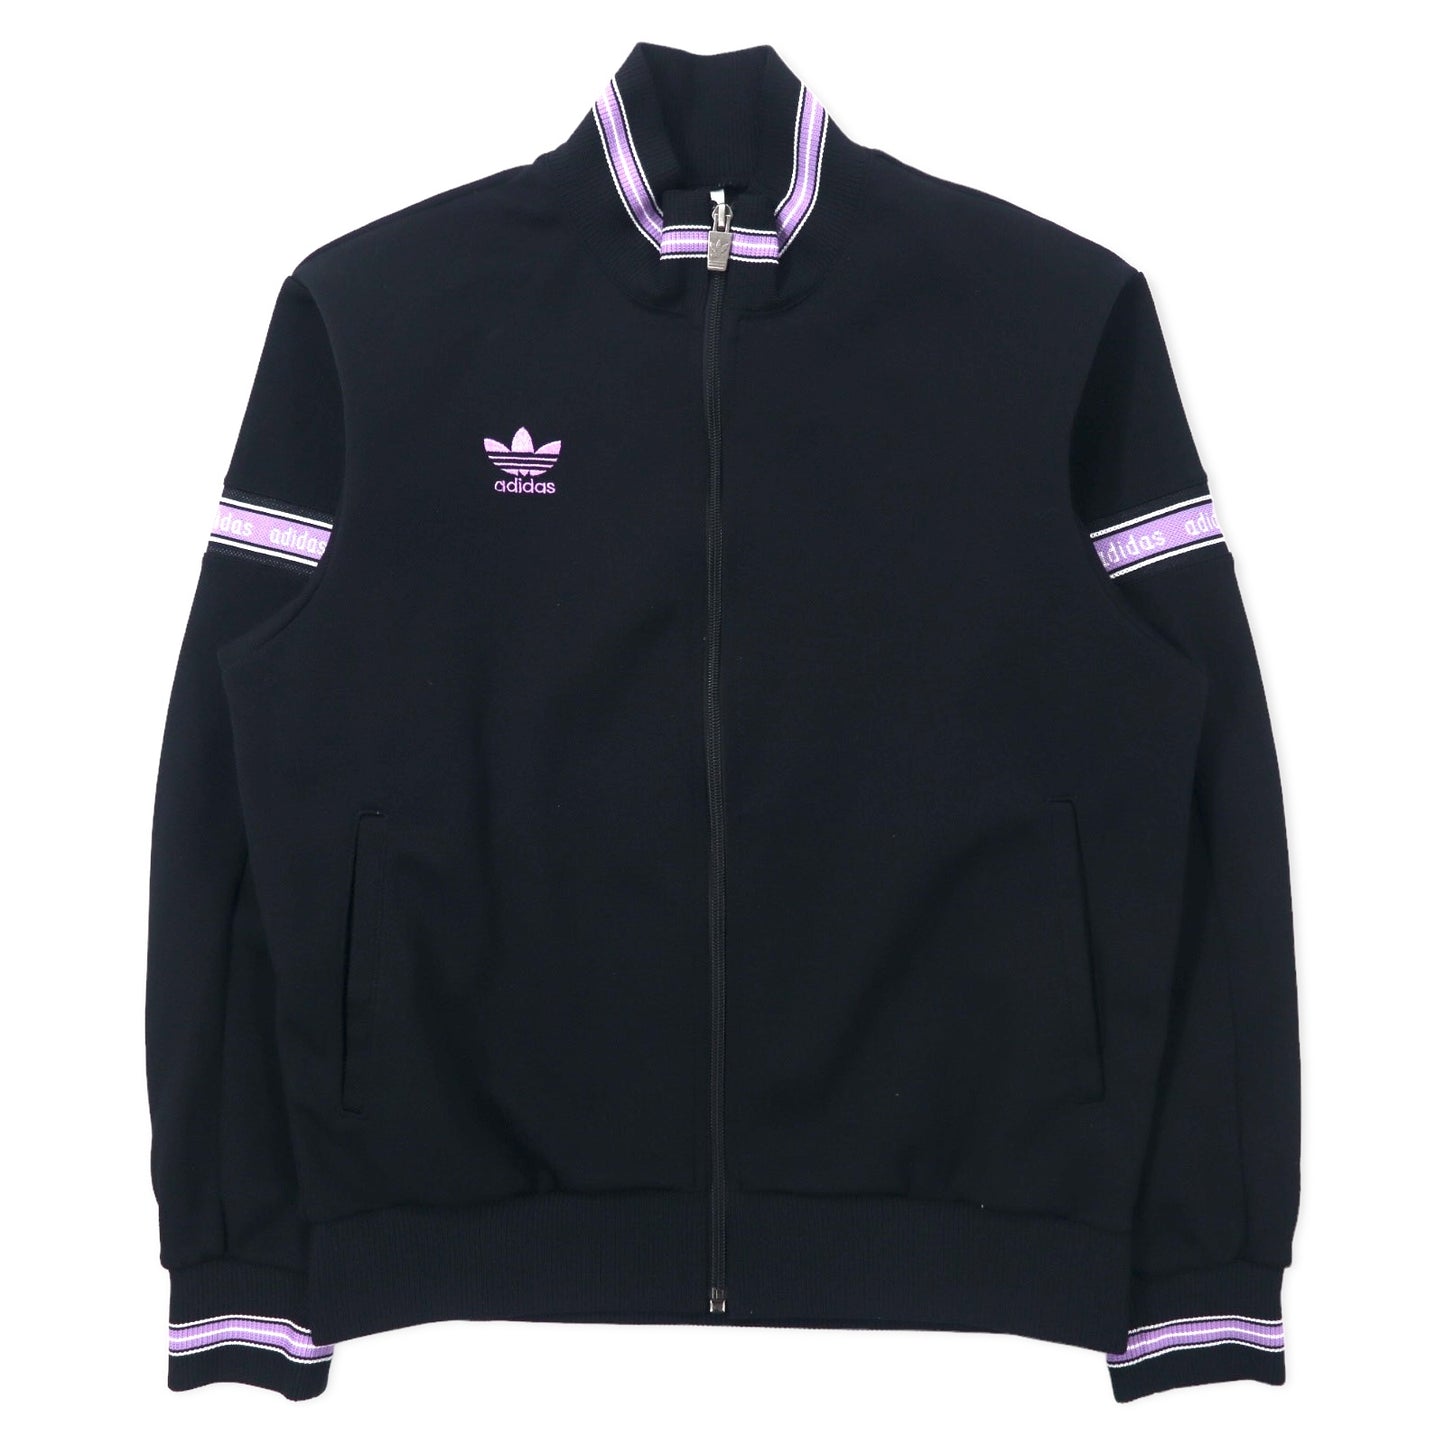 adidas 90's Descente Made Track Jacket Jersey M Black Polyester 